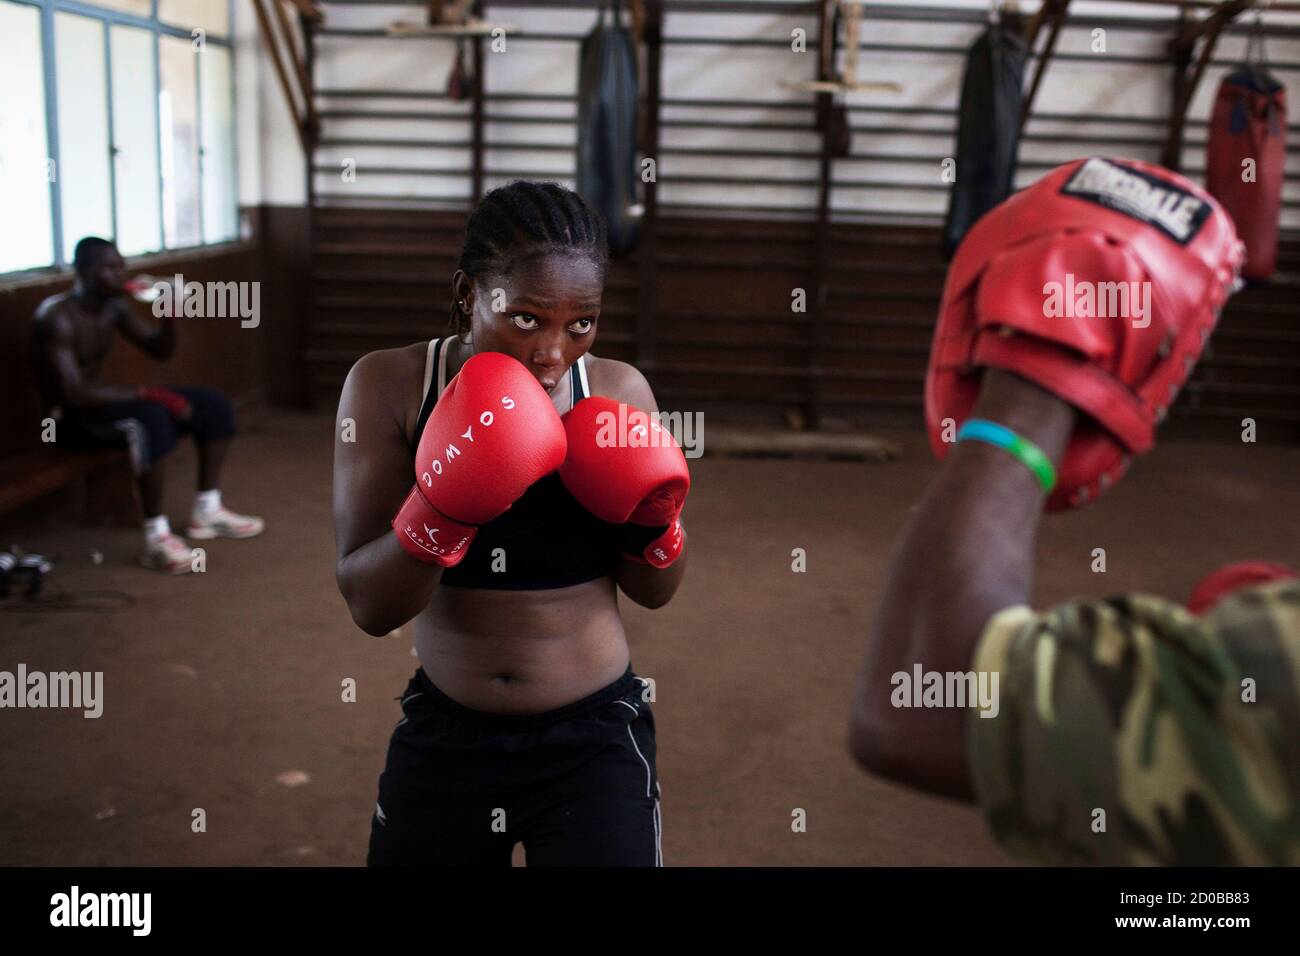 Olympic hopeful Zainab Kaite, 21, holds her guard while working out with her trainer at the national stadium in Sierra Leone's capital Freetown, April 25, 2012. Sierra Leone's national boxing team was scrambling on Wednesday to raise money to send athletes to an Olympic qualifying event starting in Morocco on Friday, but lack of financing and government support means the competition is likely out of reach for most of the national team. REUTERS/Finbarr O'Reilly (SIERRA LEONE - Tags: SPORT OLYMPICS BOXING) Stock Photo